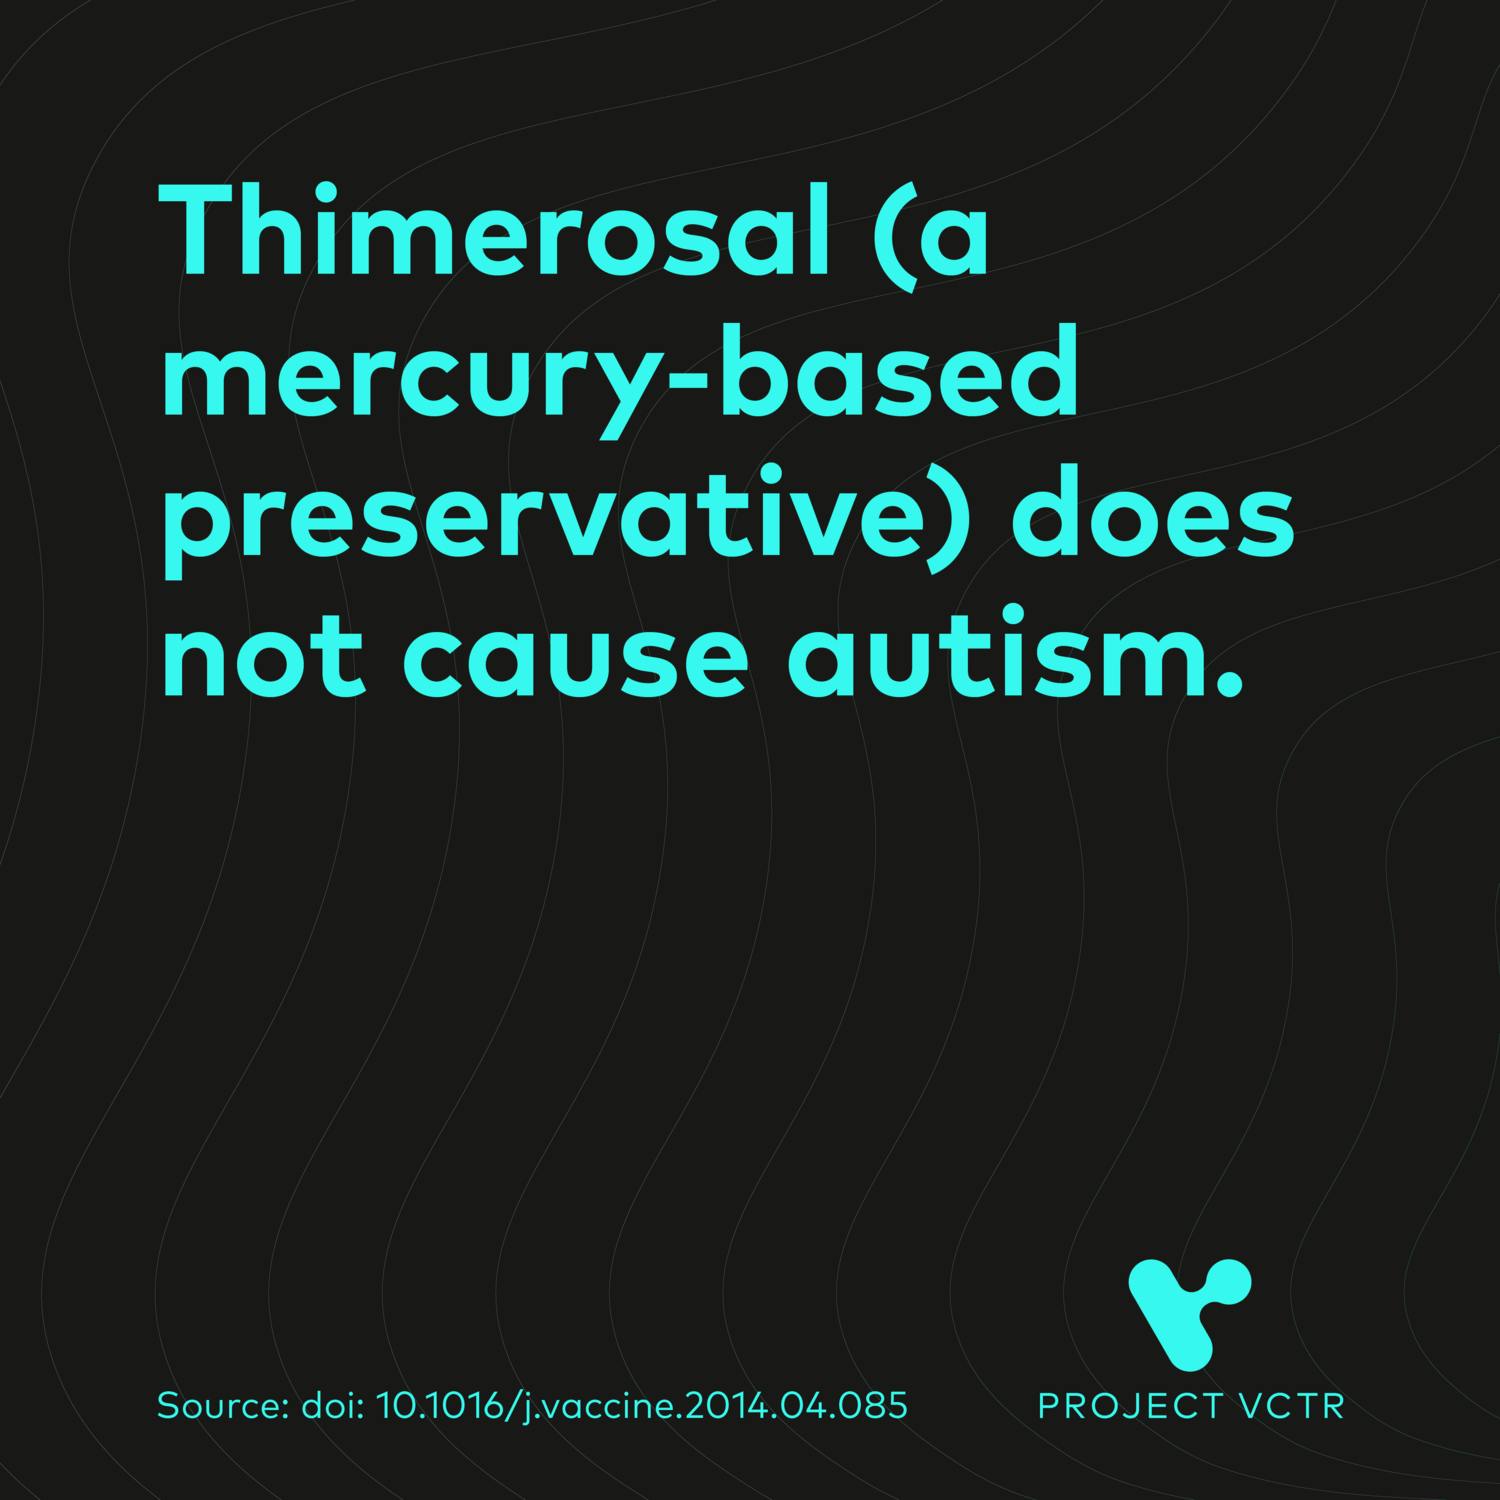 Thimerosal (a mercury-based preservative) does not cause autism.